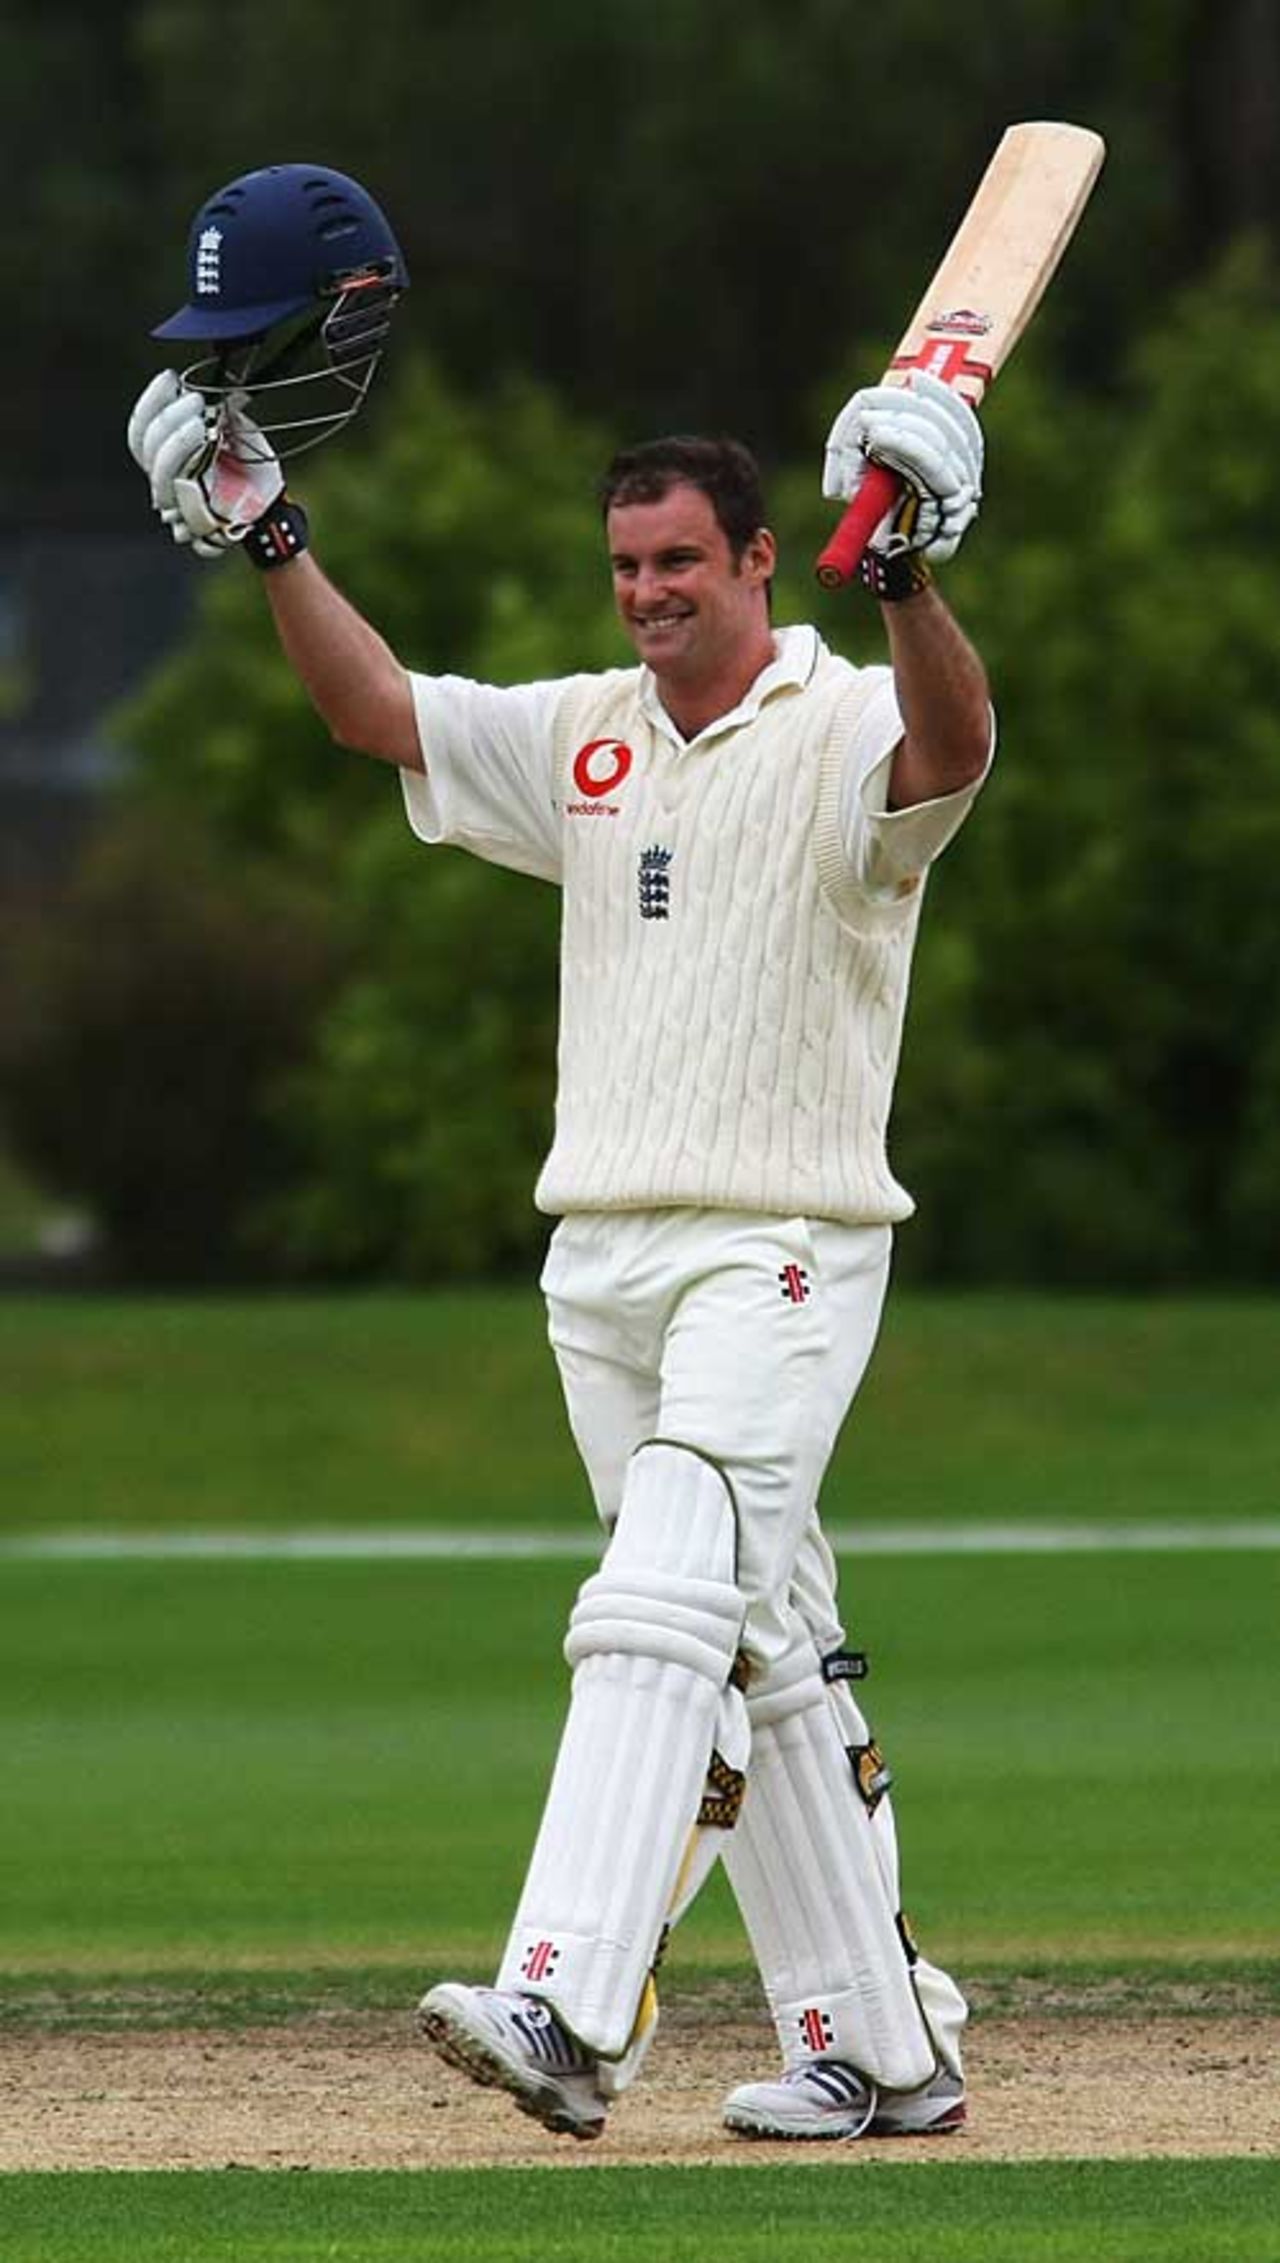 Andrew Strauss reaches his first century in England colours since August 2006, New Zealand Select XI v England XI, Dunedin, March 1, 2008